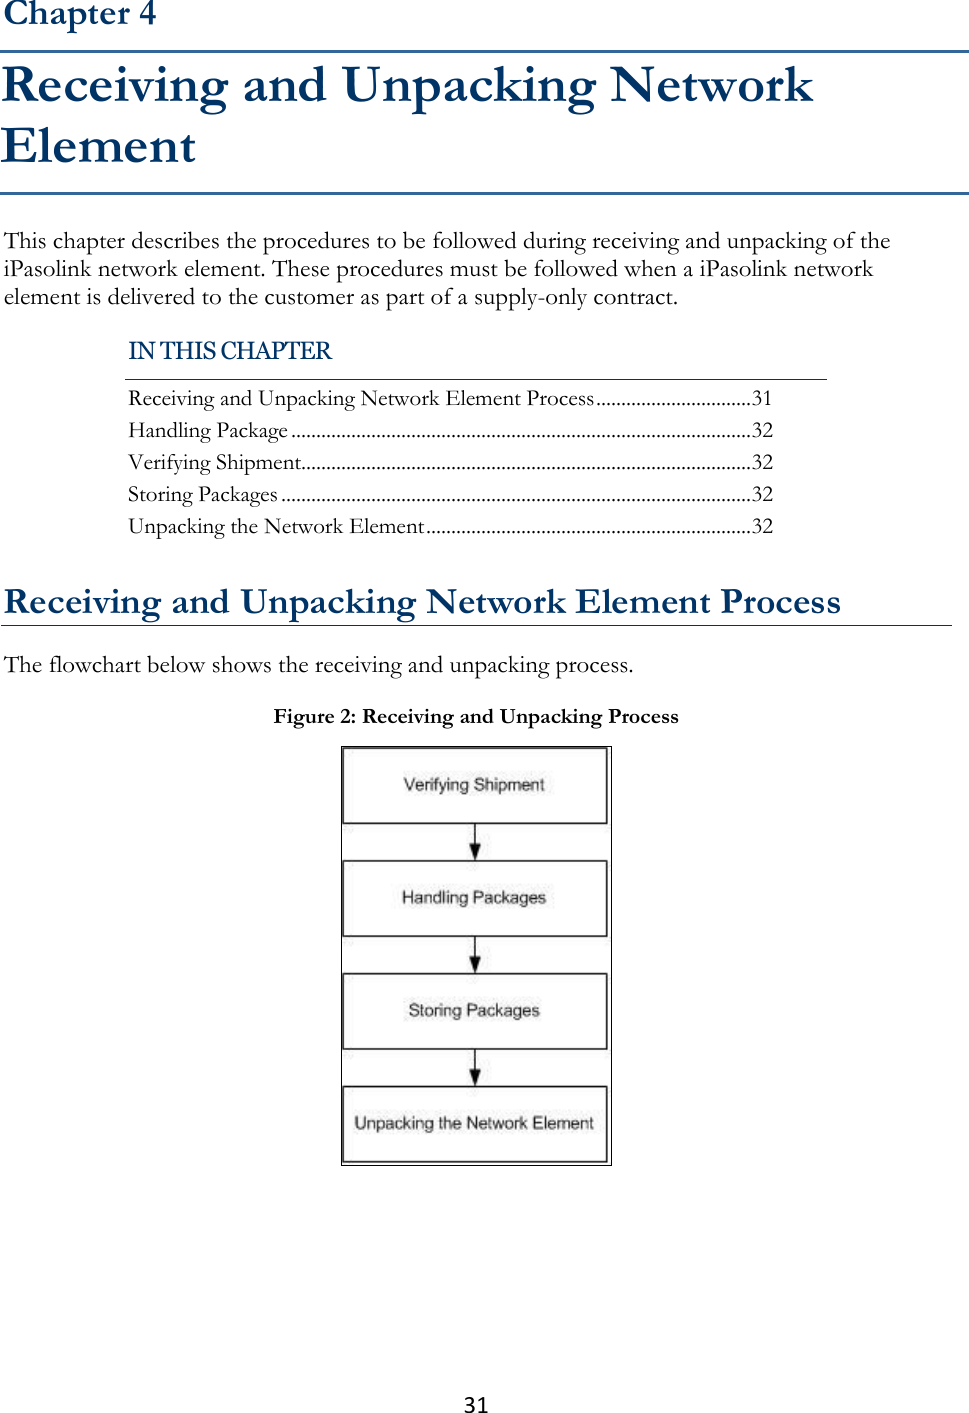 31  This chapter describes the procedures to be followed during receiving and unpacking of the iPasolink network element. These procedures must be followed when a iPasolink network element is delivered to the customer as part of a supply-only contract.   Receiving and Unpacking Network Element Process The flowchart below shows the receiving and unpacking process.  Chapter 4 Receiving and Unpacking Network Element IN THIS CHAPTER Receiving and Unpacking Network Element Process ............................... 31 Handling Package ............................................................................................ 32 Verifying Shipment.......................................................................................... 32 Storing Packages .............................................................................................. 32 Unpacking the Network Element ................................................................. 32 Figure 2: Receiving and Unpacking Process  